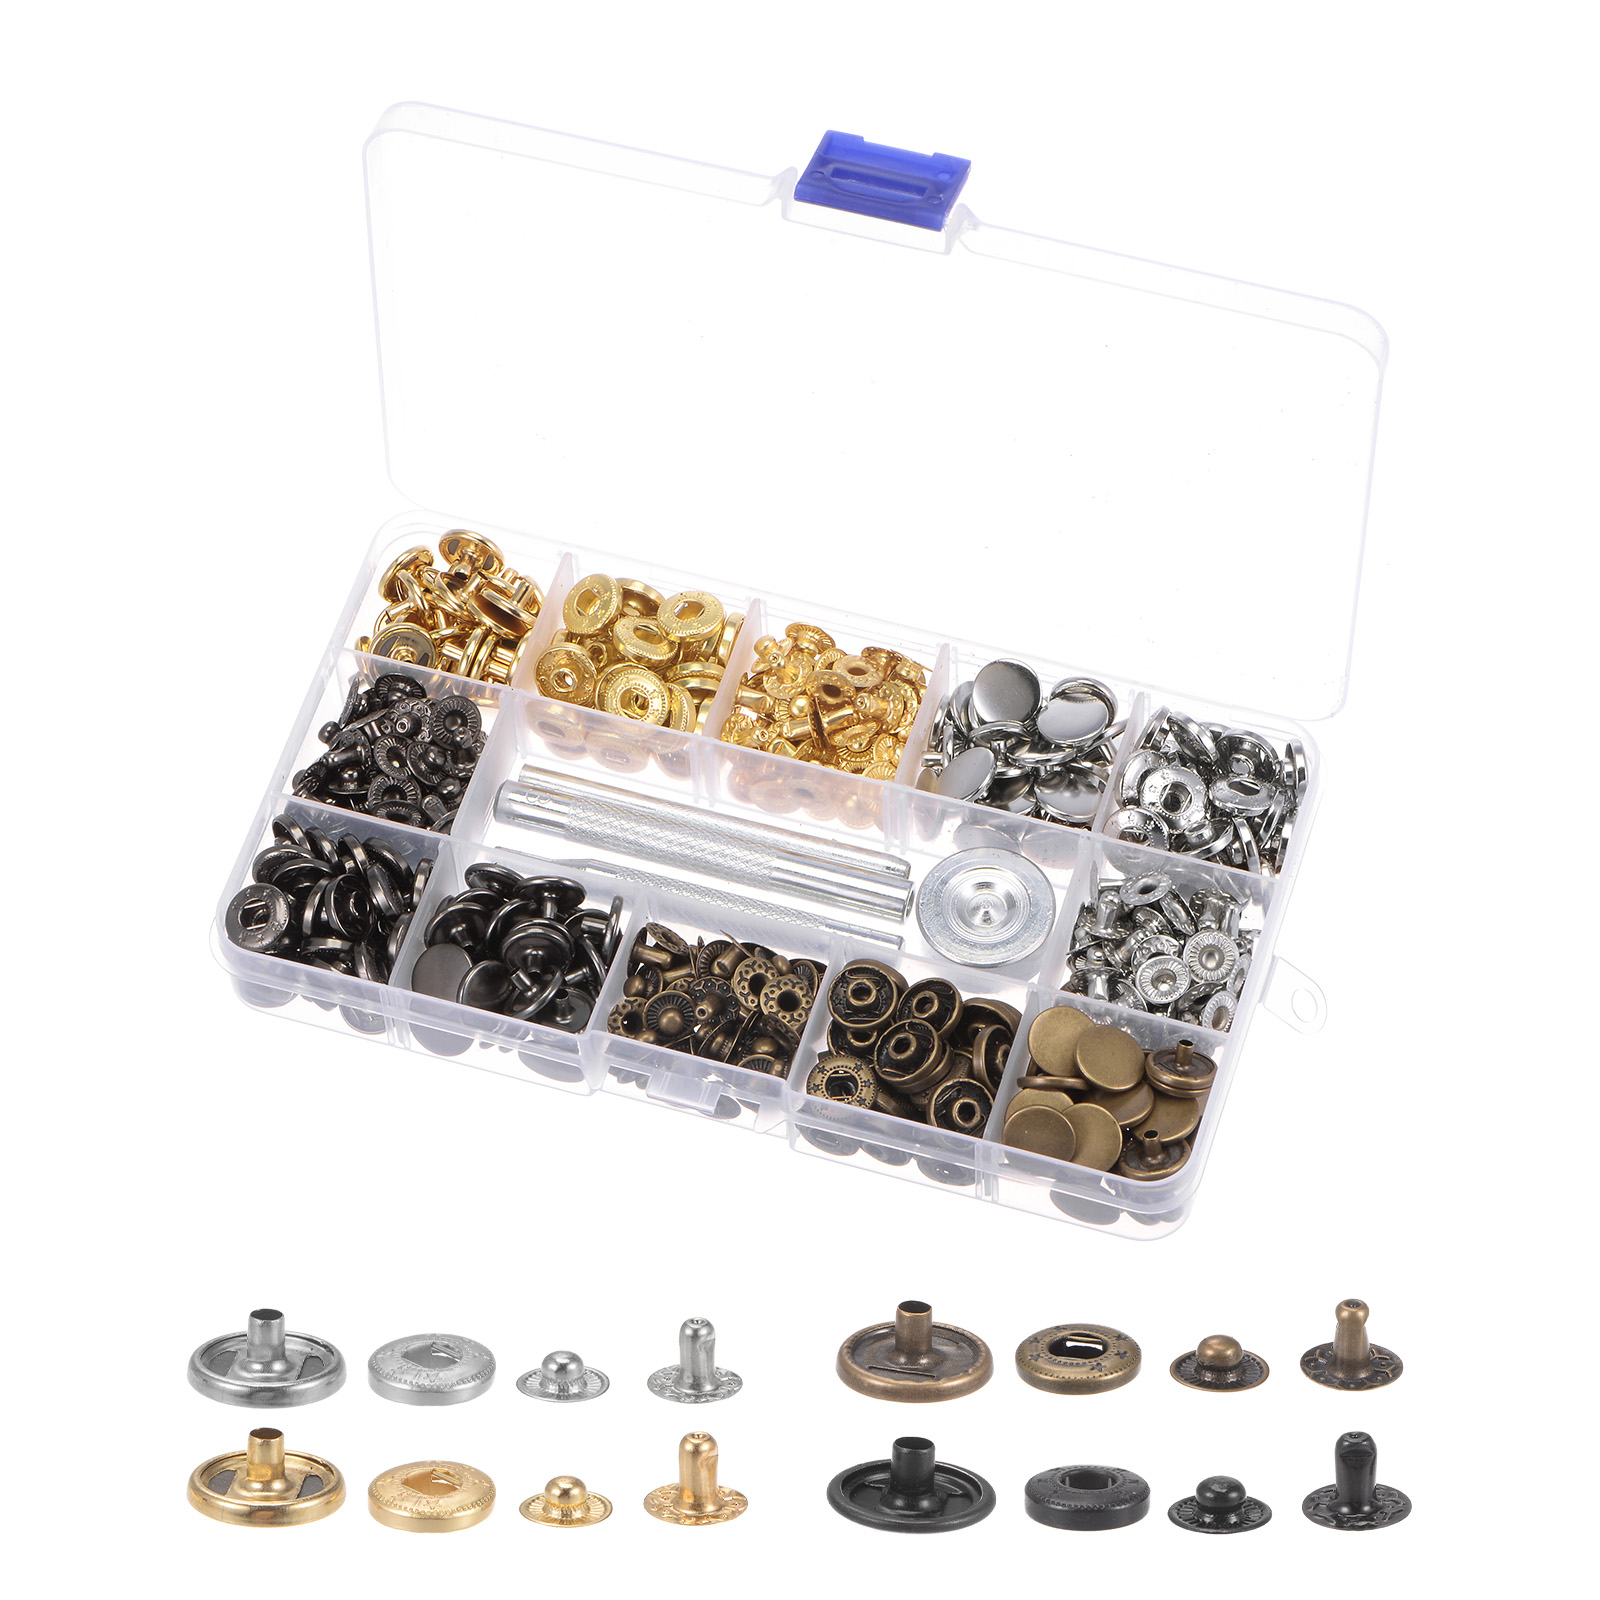 Unique Bargains 120 Sets Snap Fasteners Kit Copper with Setter Tools & Storage Box for Clothing